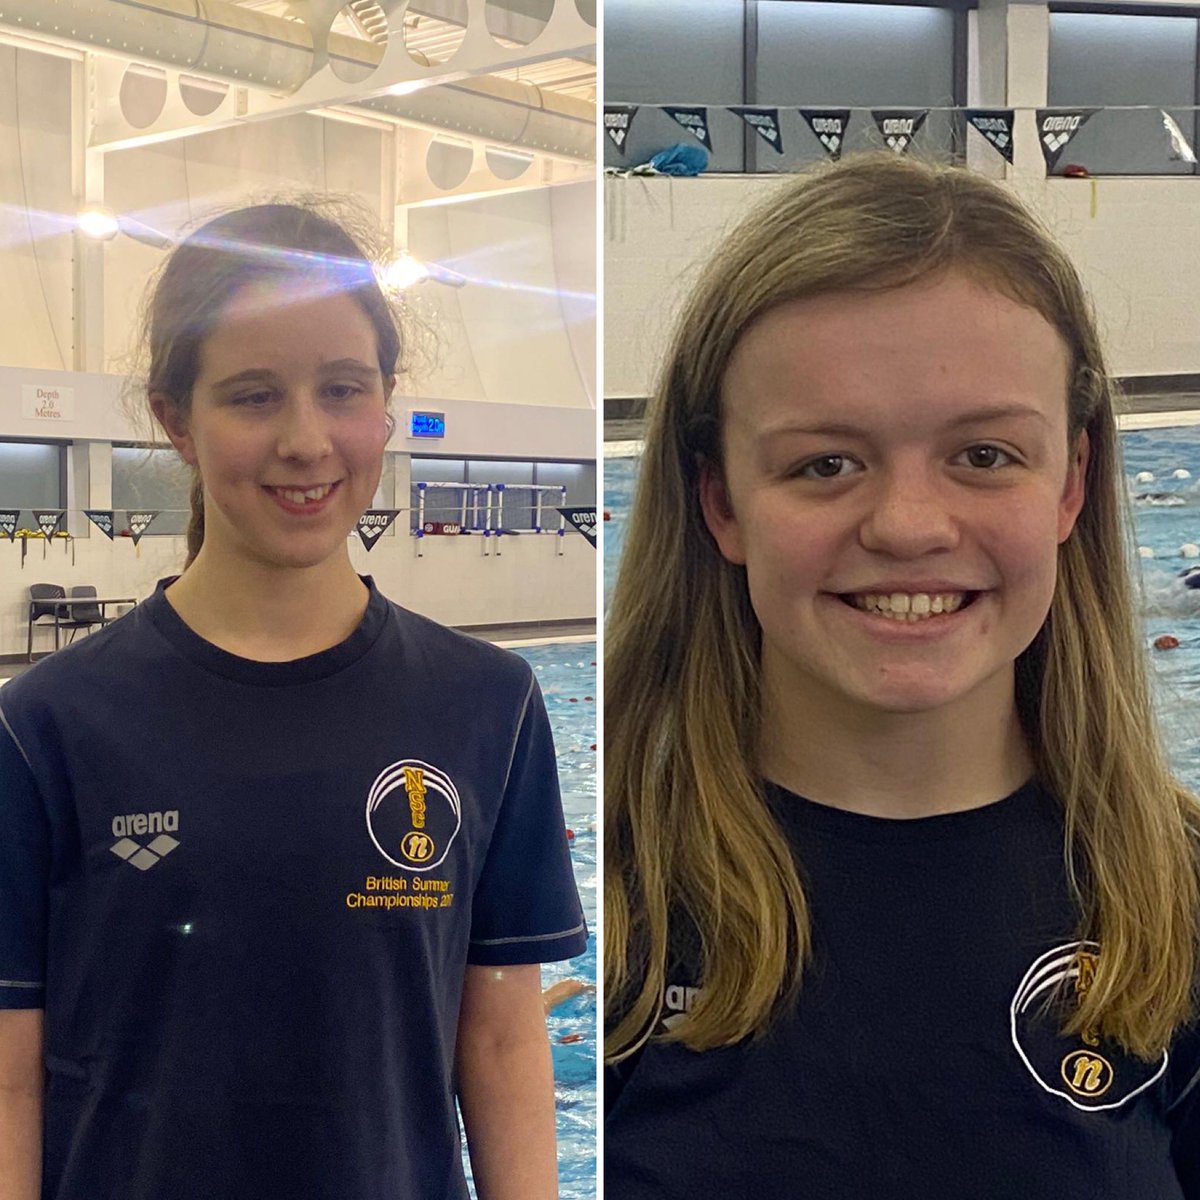 Many congratulations to Northamptonshire's @maisiee26 & @ScarlettH_swim of @NSC_Swim who have been selected in the @britishswimming team to compete at the World @Para_swimming Championships in Manchester this summer! britishswimming.org/news/para-swim… RT @LONorthants @BBCLookEast @itvanglia